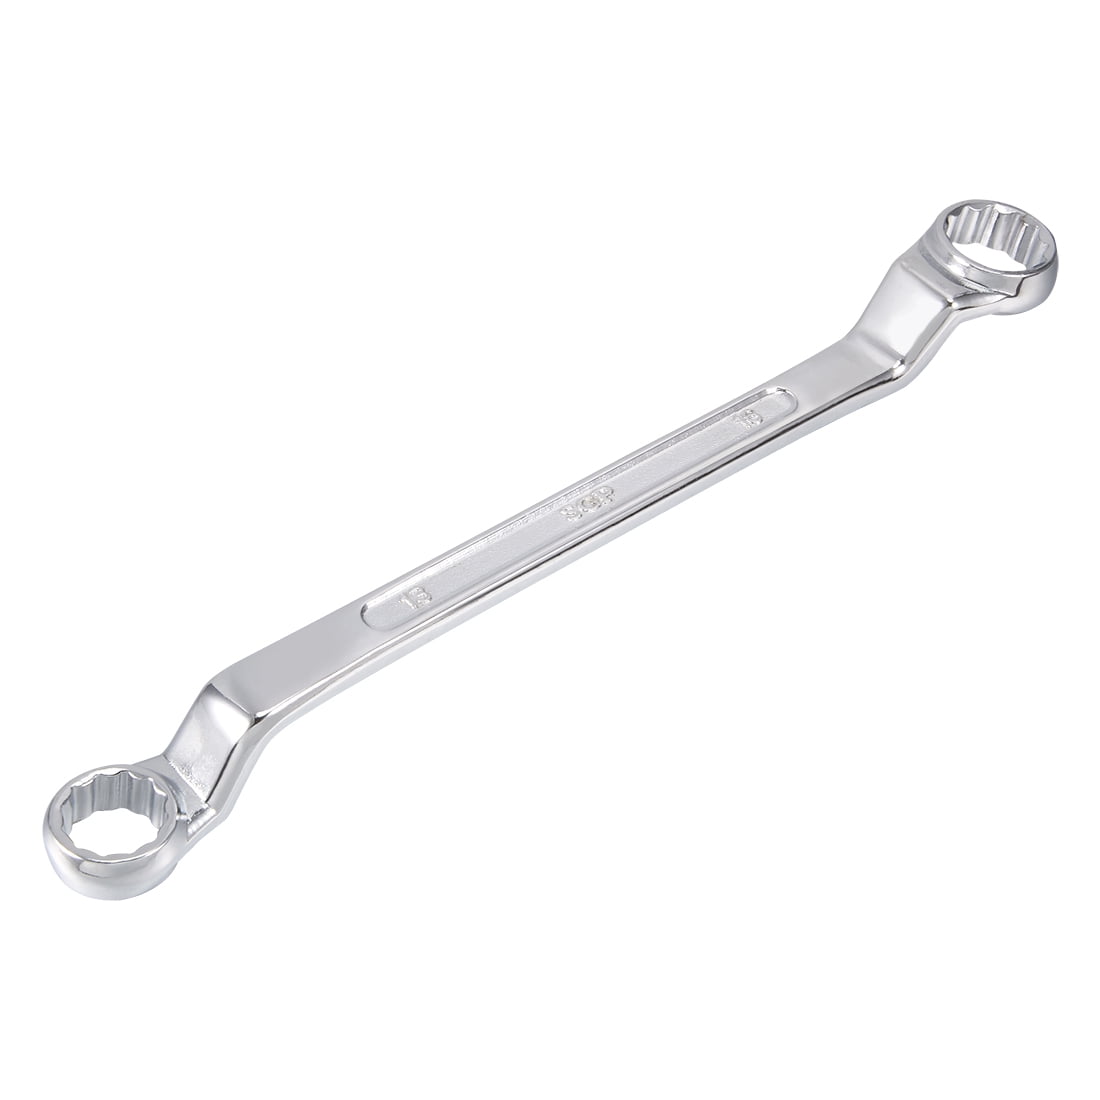 Metric Deep Offset Ring Spanner Spanners Wrench 5.5mm 32mm 